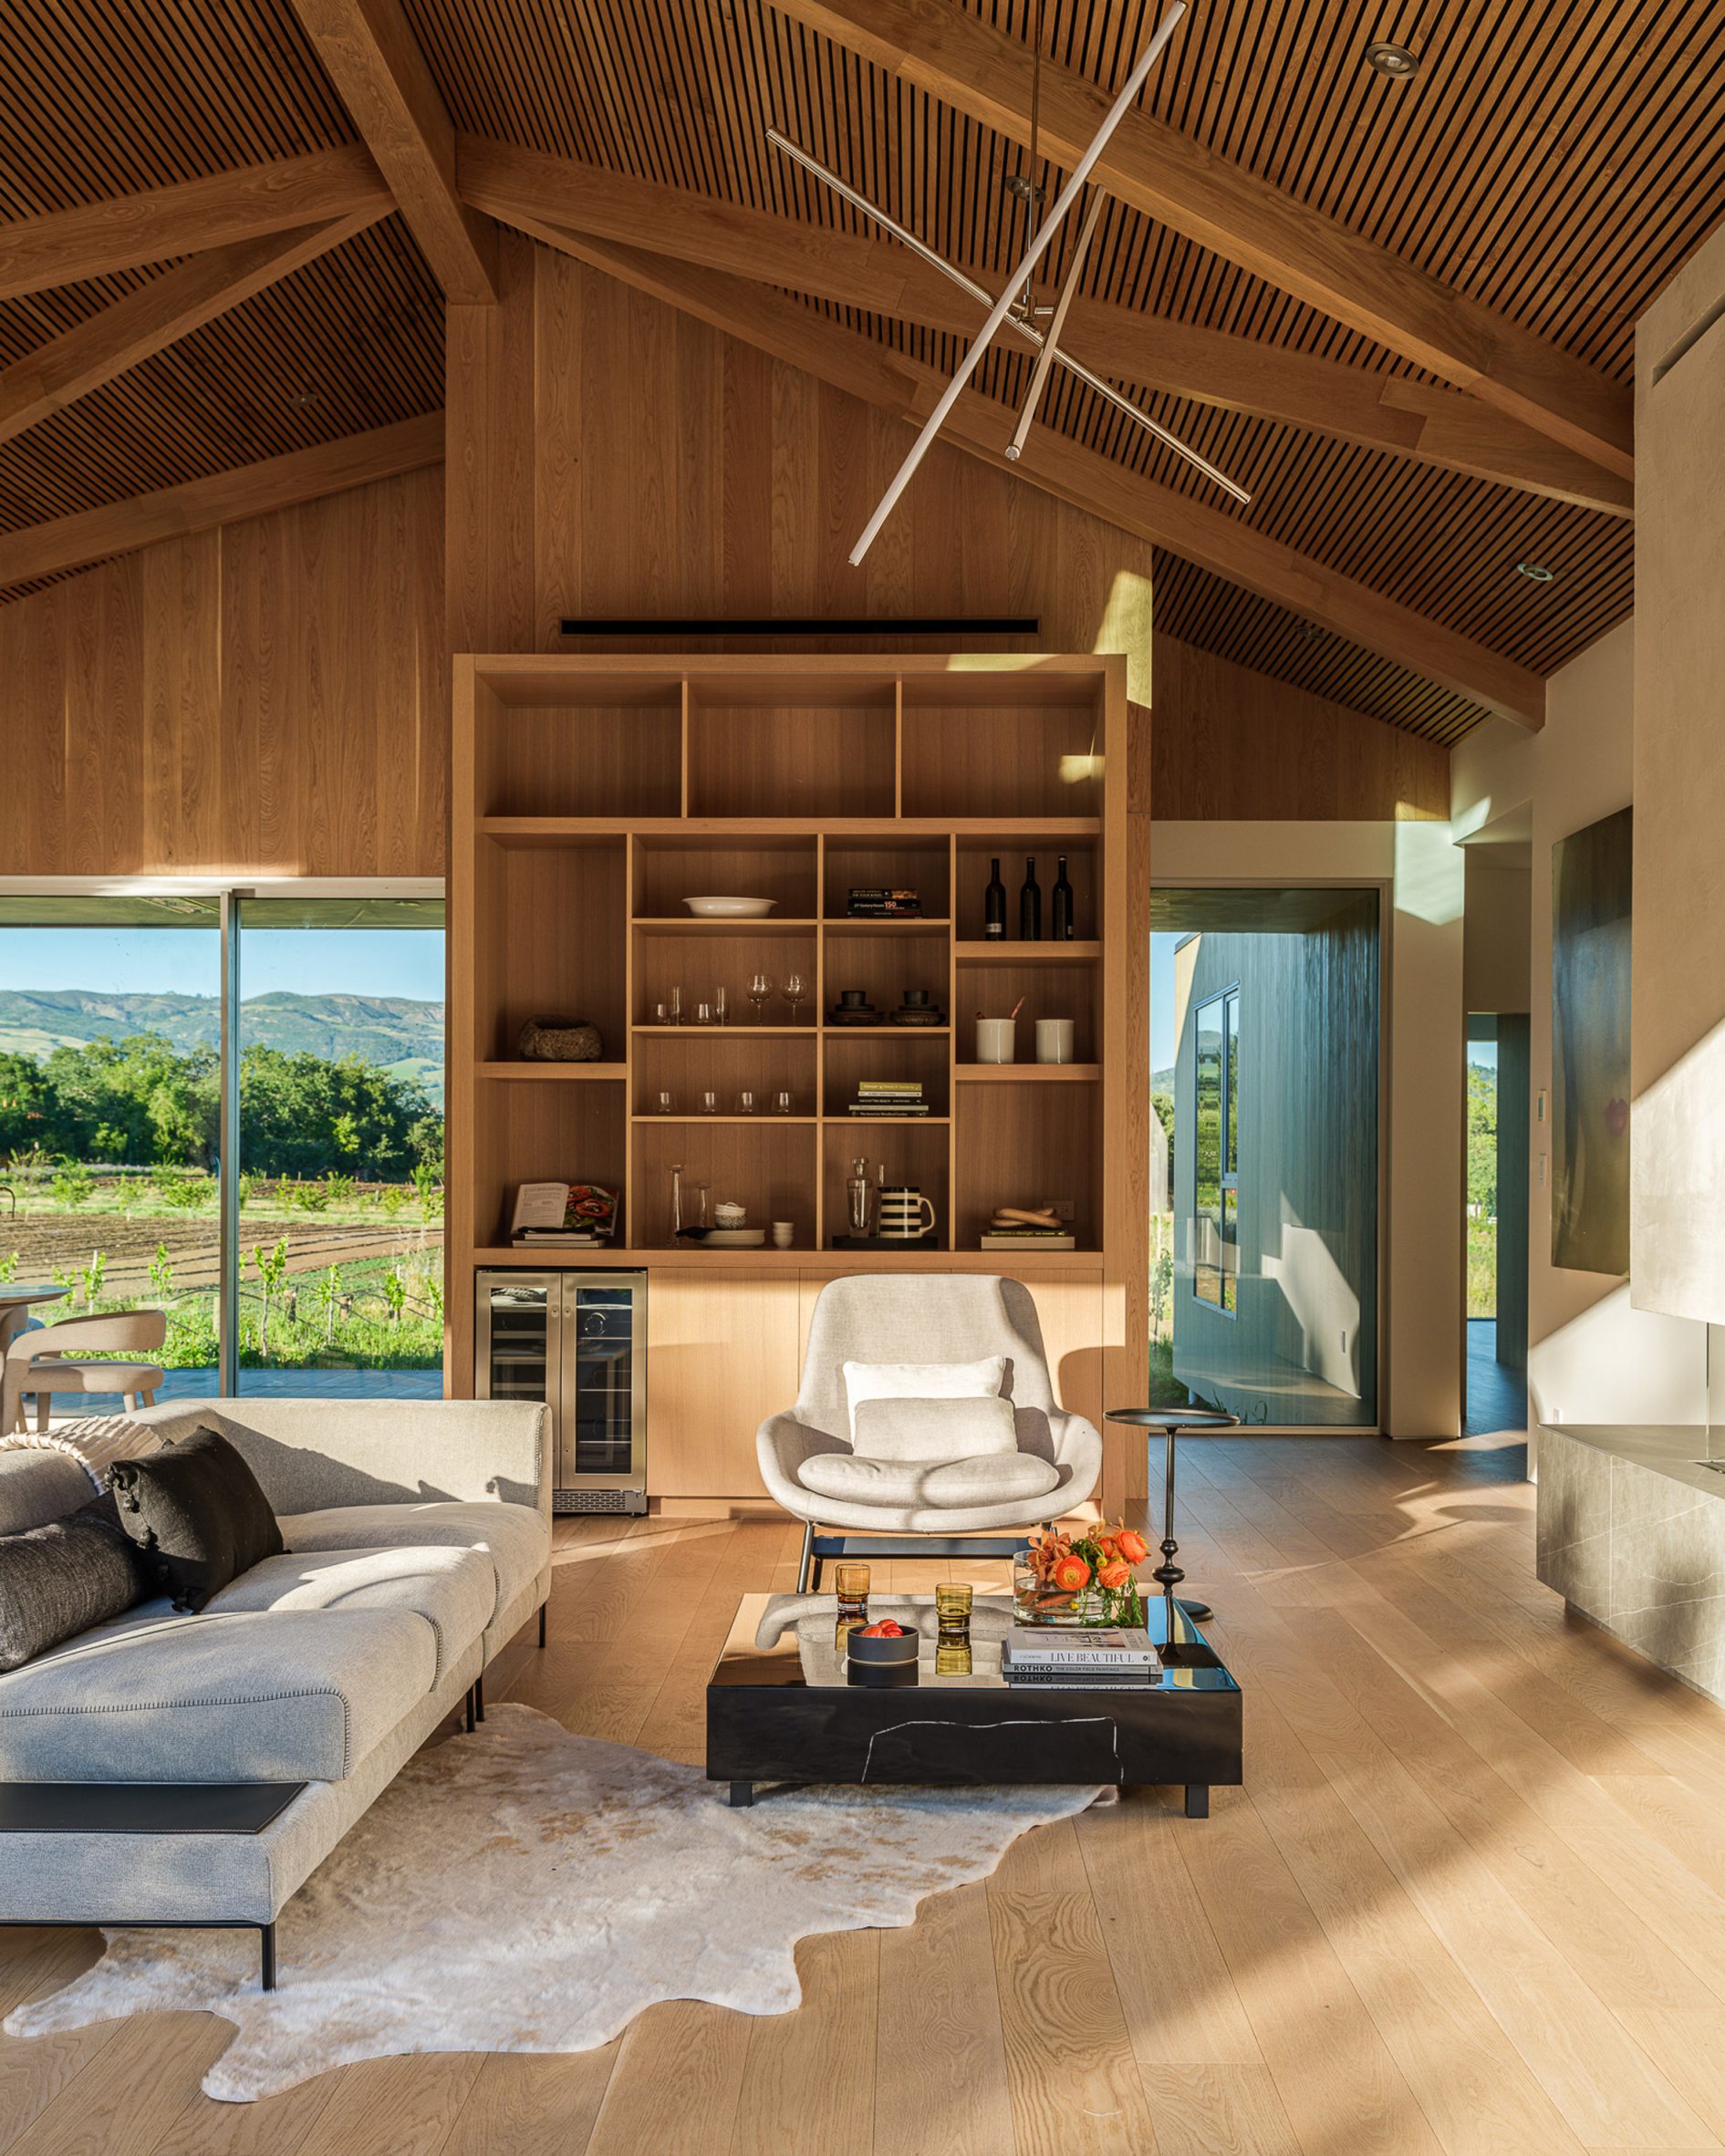 Living room in a timber farmhouse with built-in wooden storage and views of fields